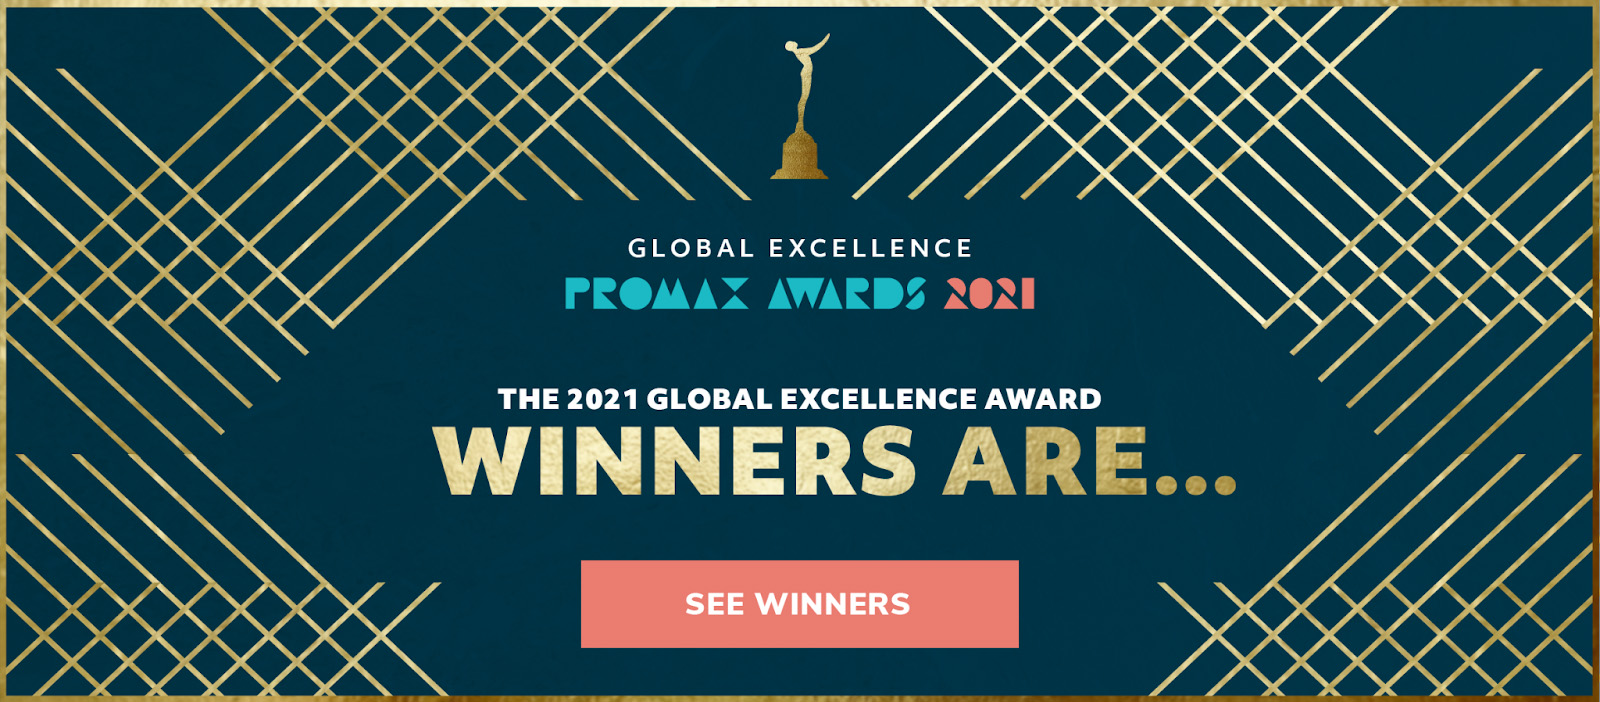 Promax Awards Global Excellence 2021